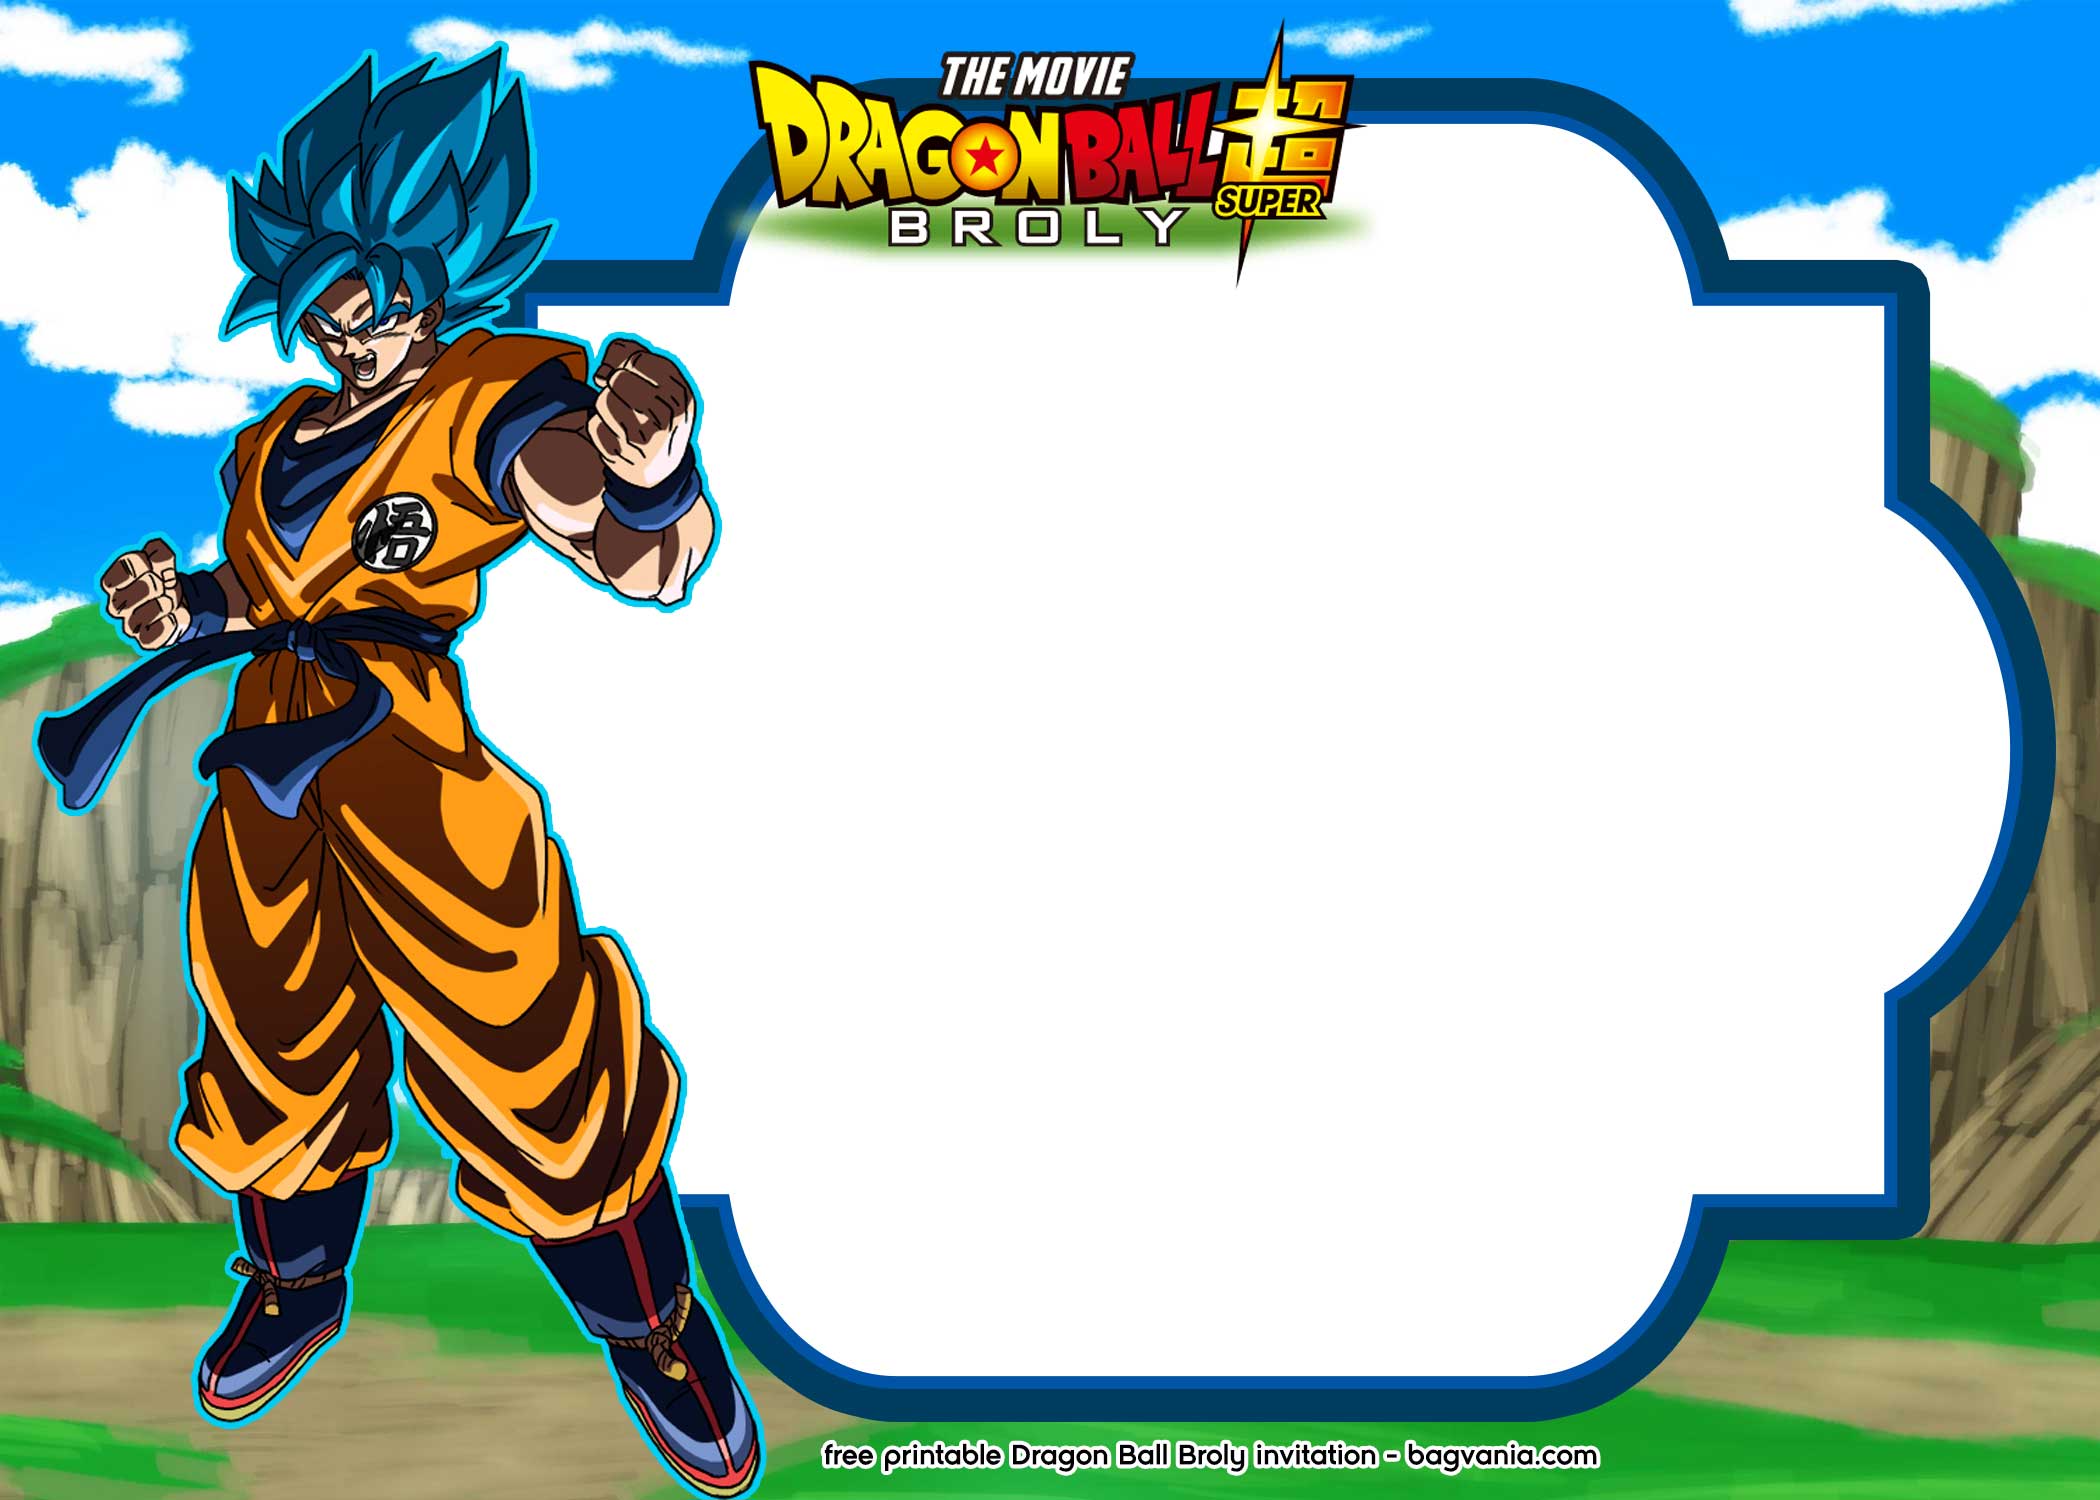 Dbz designs, themes, templates and downloadable graphic elements